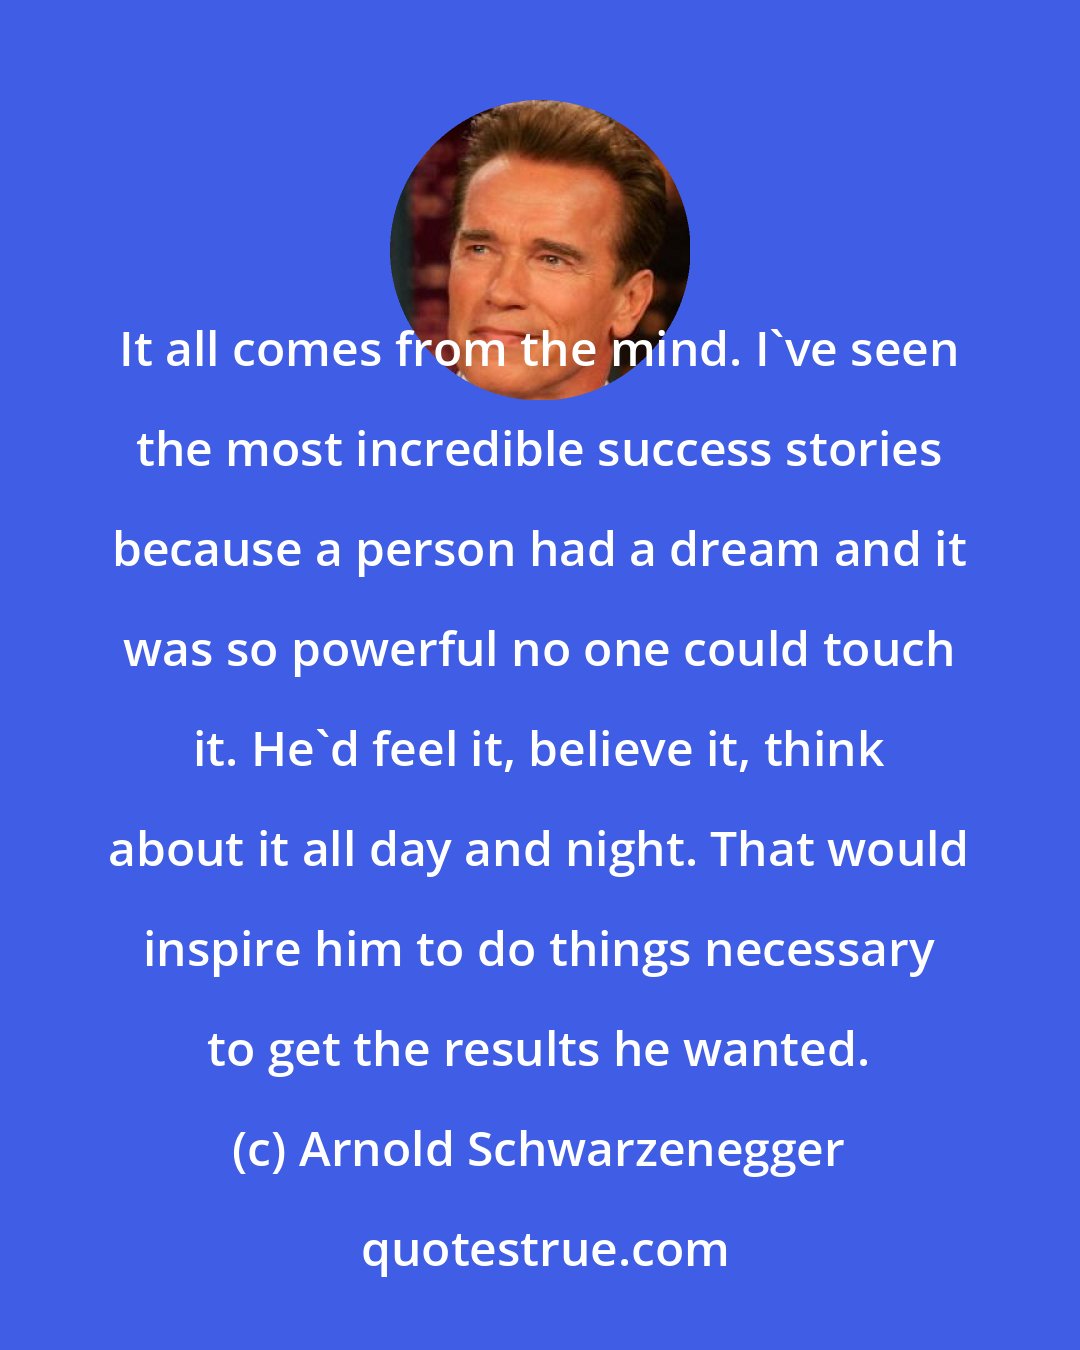 Arnold Schwarzenegger: It all comes from the mind. I've seen the most incredible success stories because a person had a dream and it was so powerful no one could touch it. He'd feel it, believe it, think about it all day and night. That would inspire him to do things necessary to get the results he wanted.